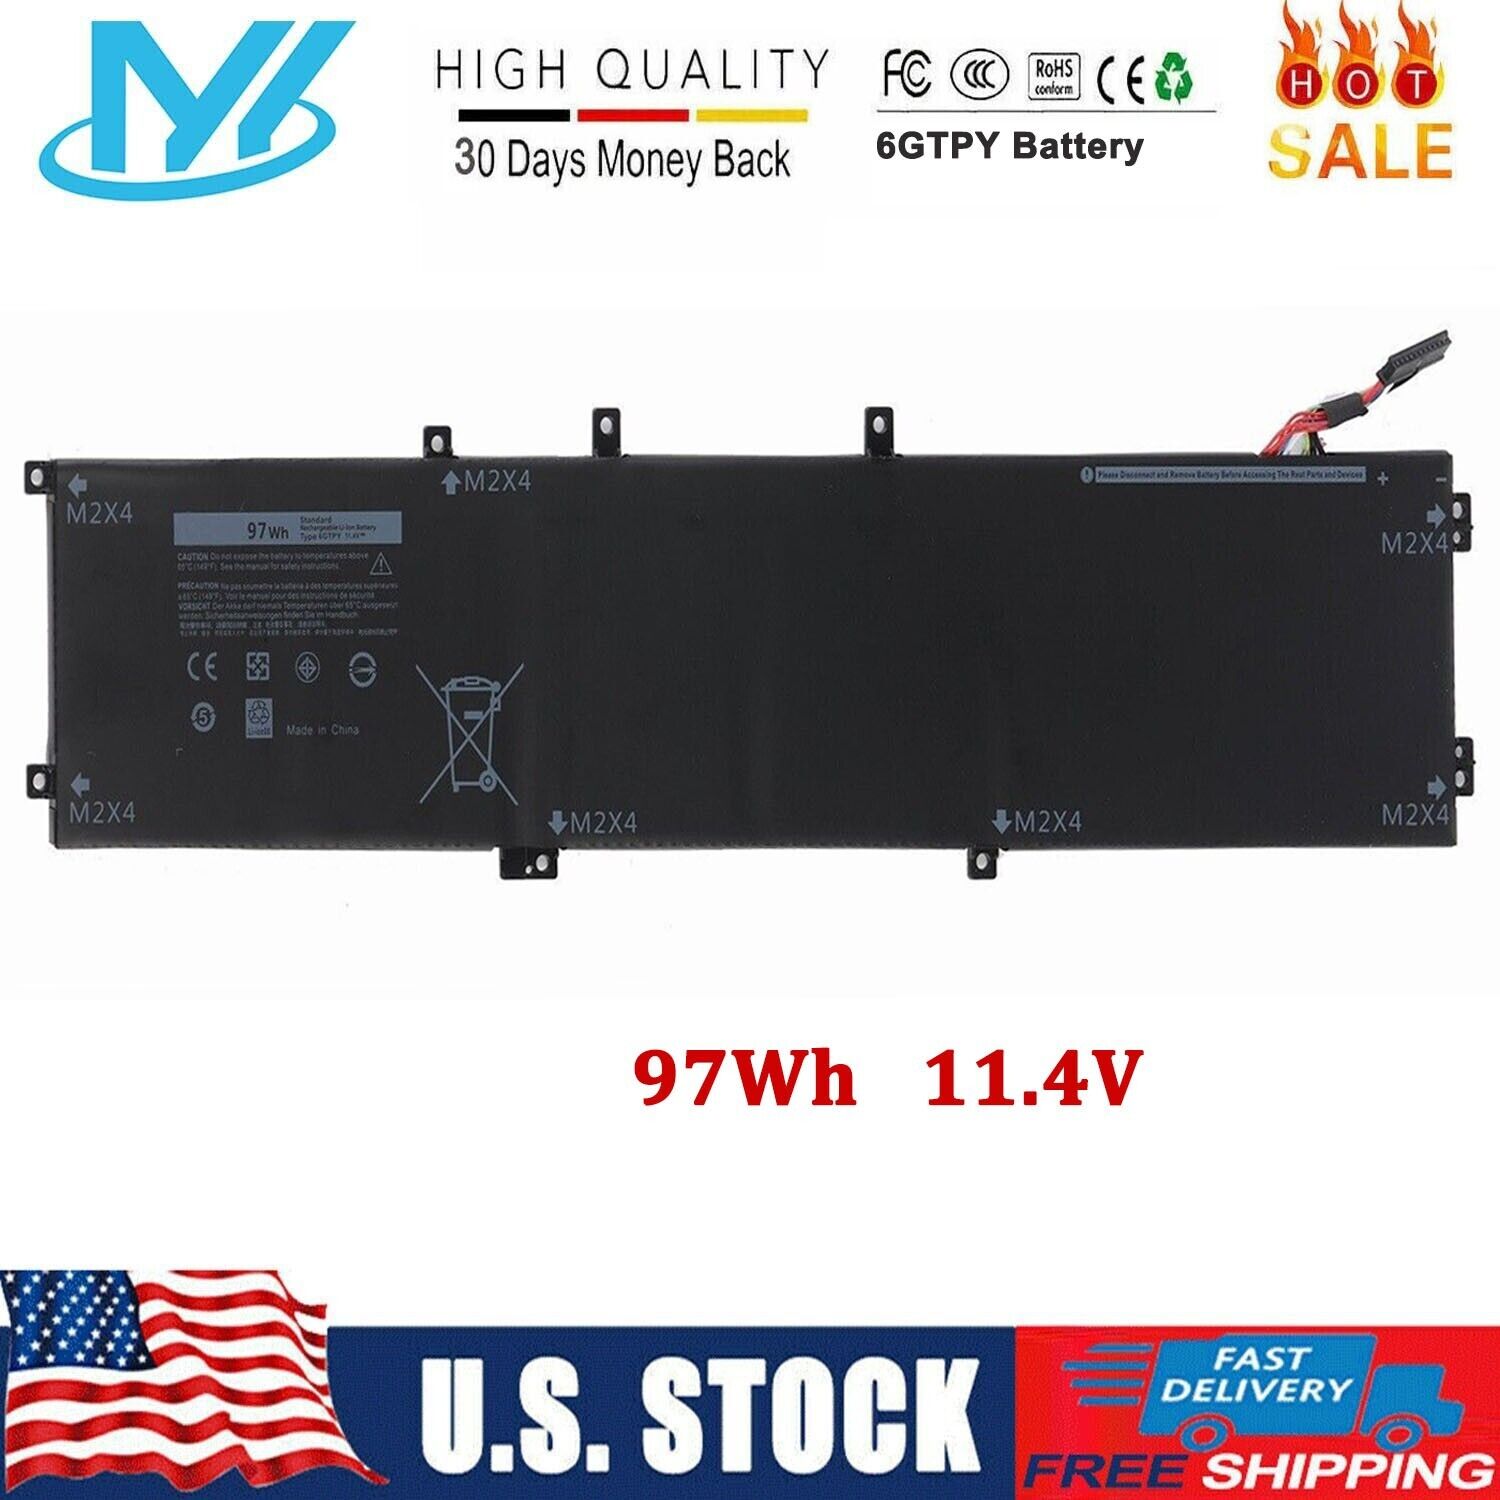 ✅Type 6GTPY Battery 97Wh Replacement Battery for Dell XPS 15 9550 9560 9570 7590